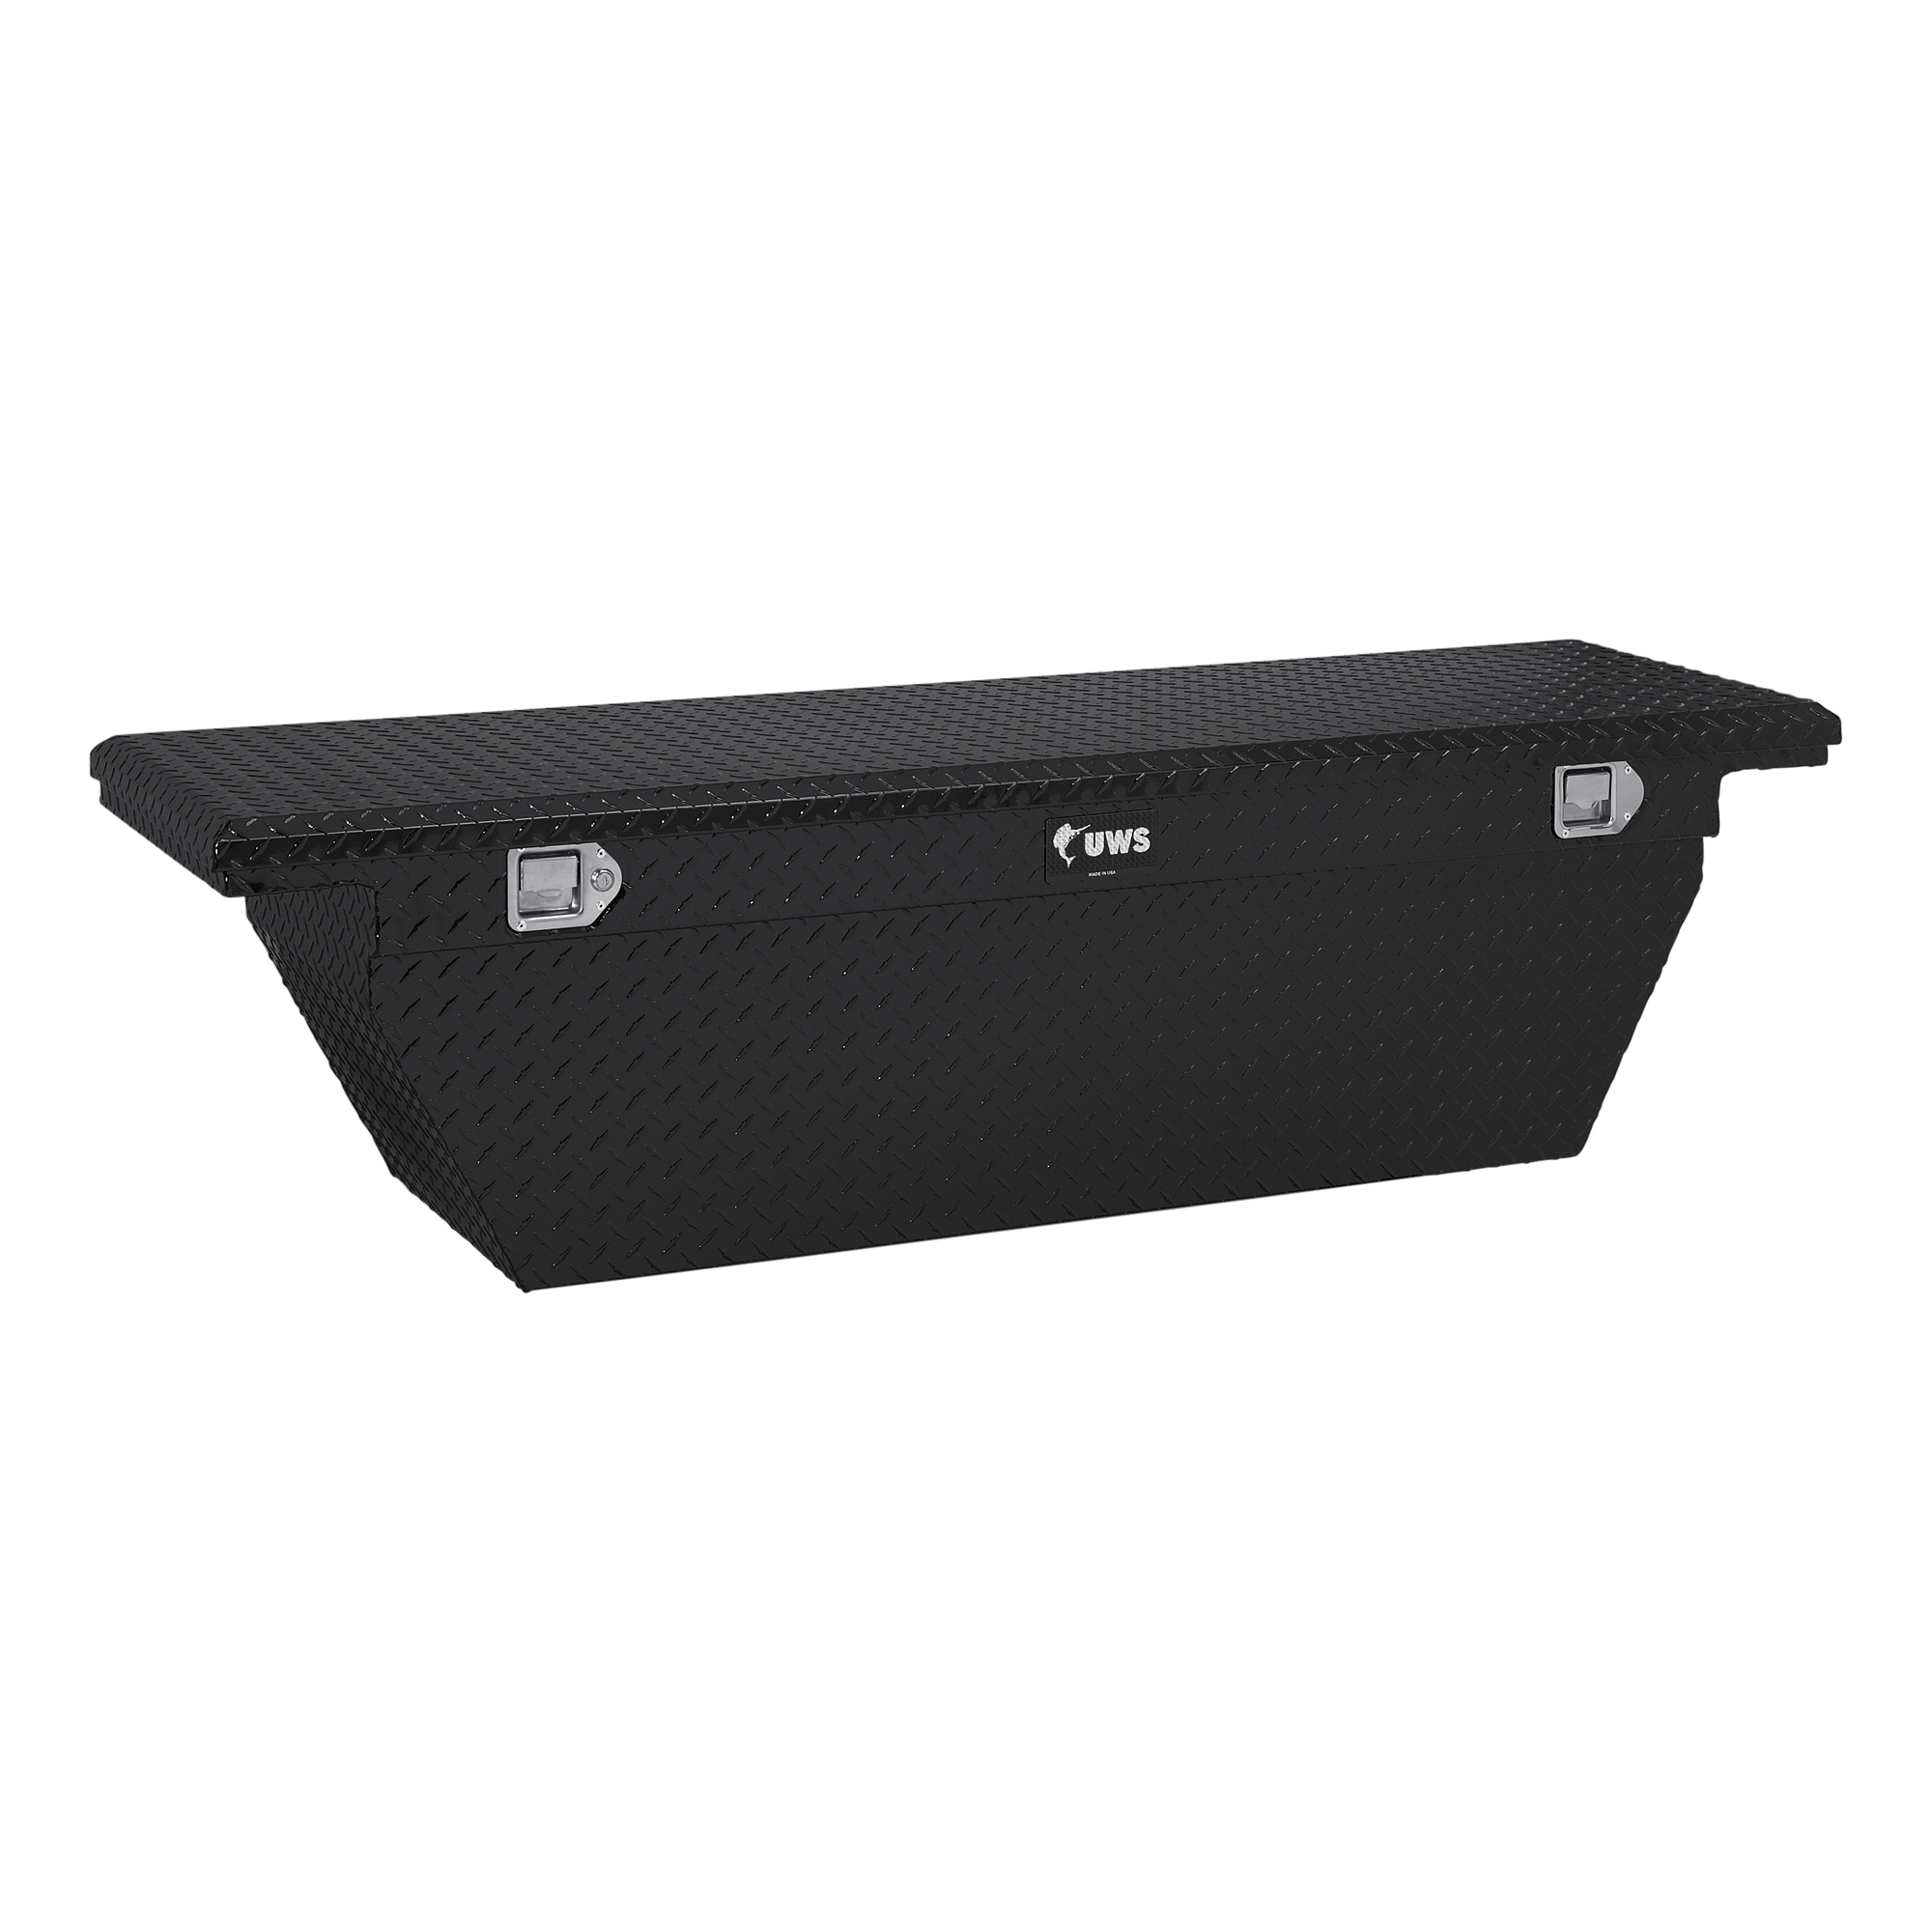 UWS, 69Inch Angled Crossover Truck Tool Box, Width 69.875 in, Material Aluminum, Color Finish Gloss Black, Model EC10772